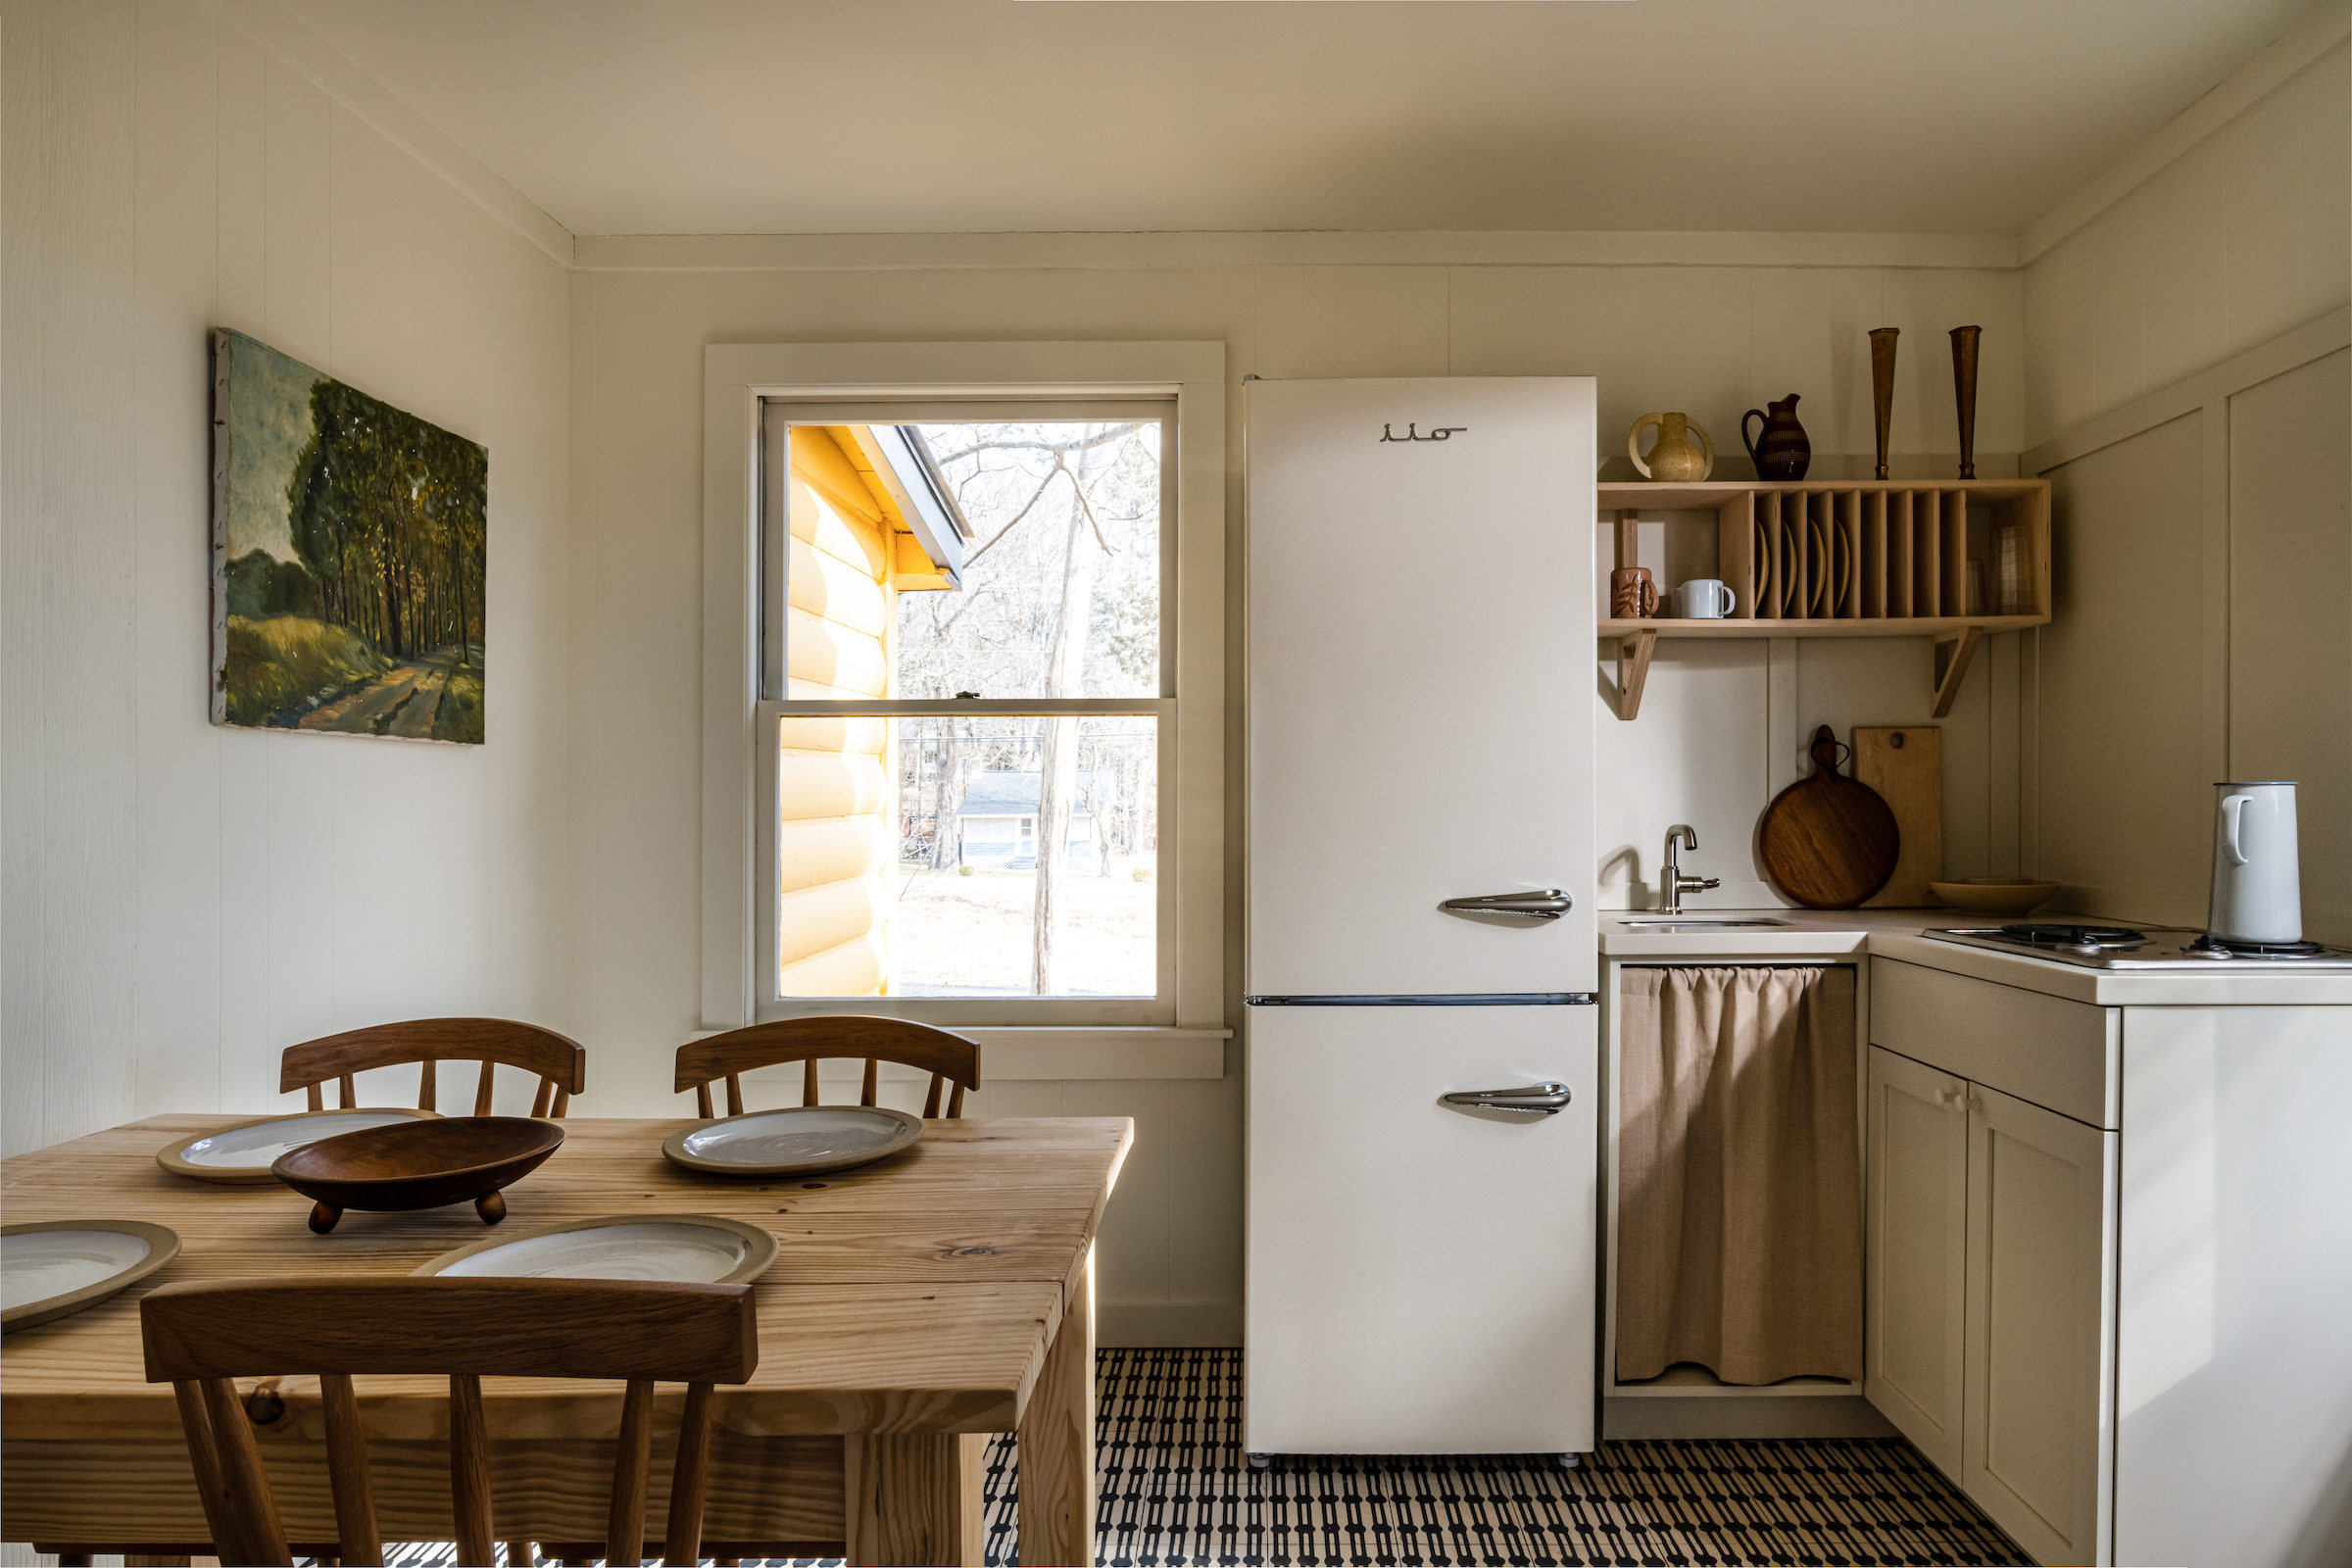 the compact kitchen in this two bedroom cabin has an iio retro mod fridge and a 24